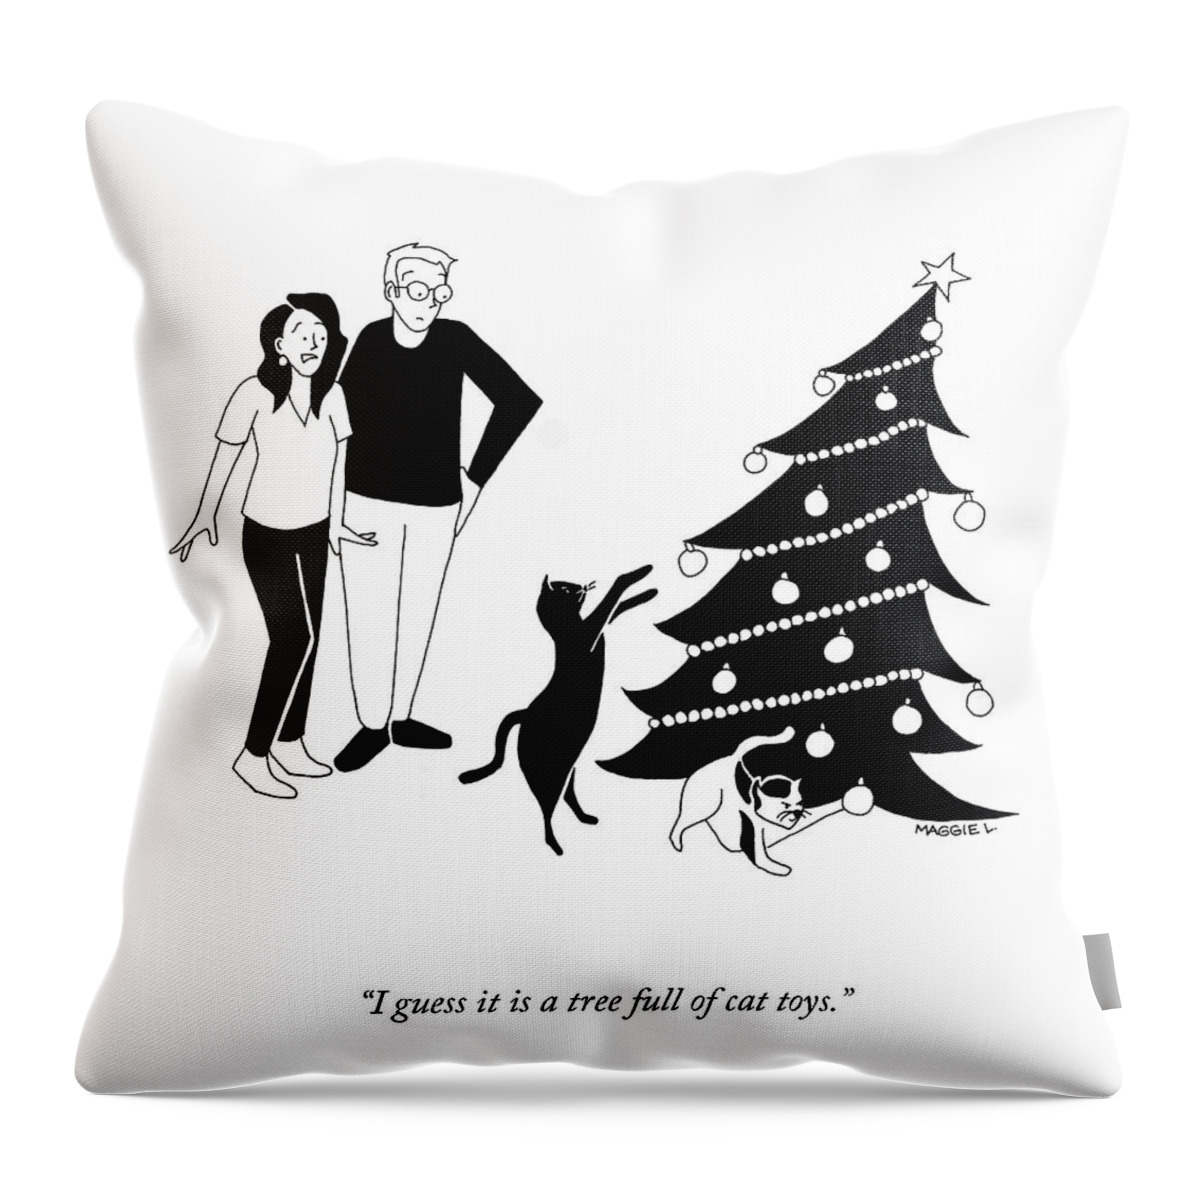 A Tree Full Of Cat Toys Throw Pillow